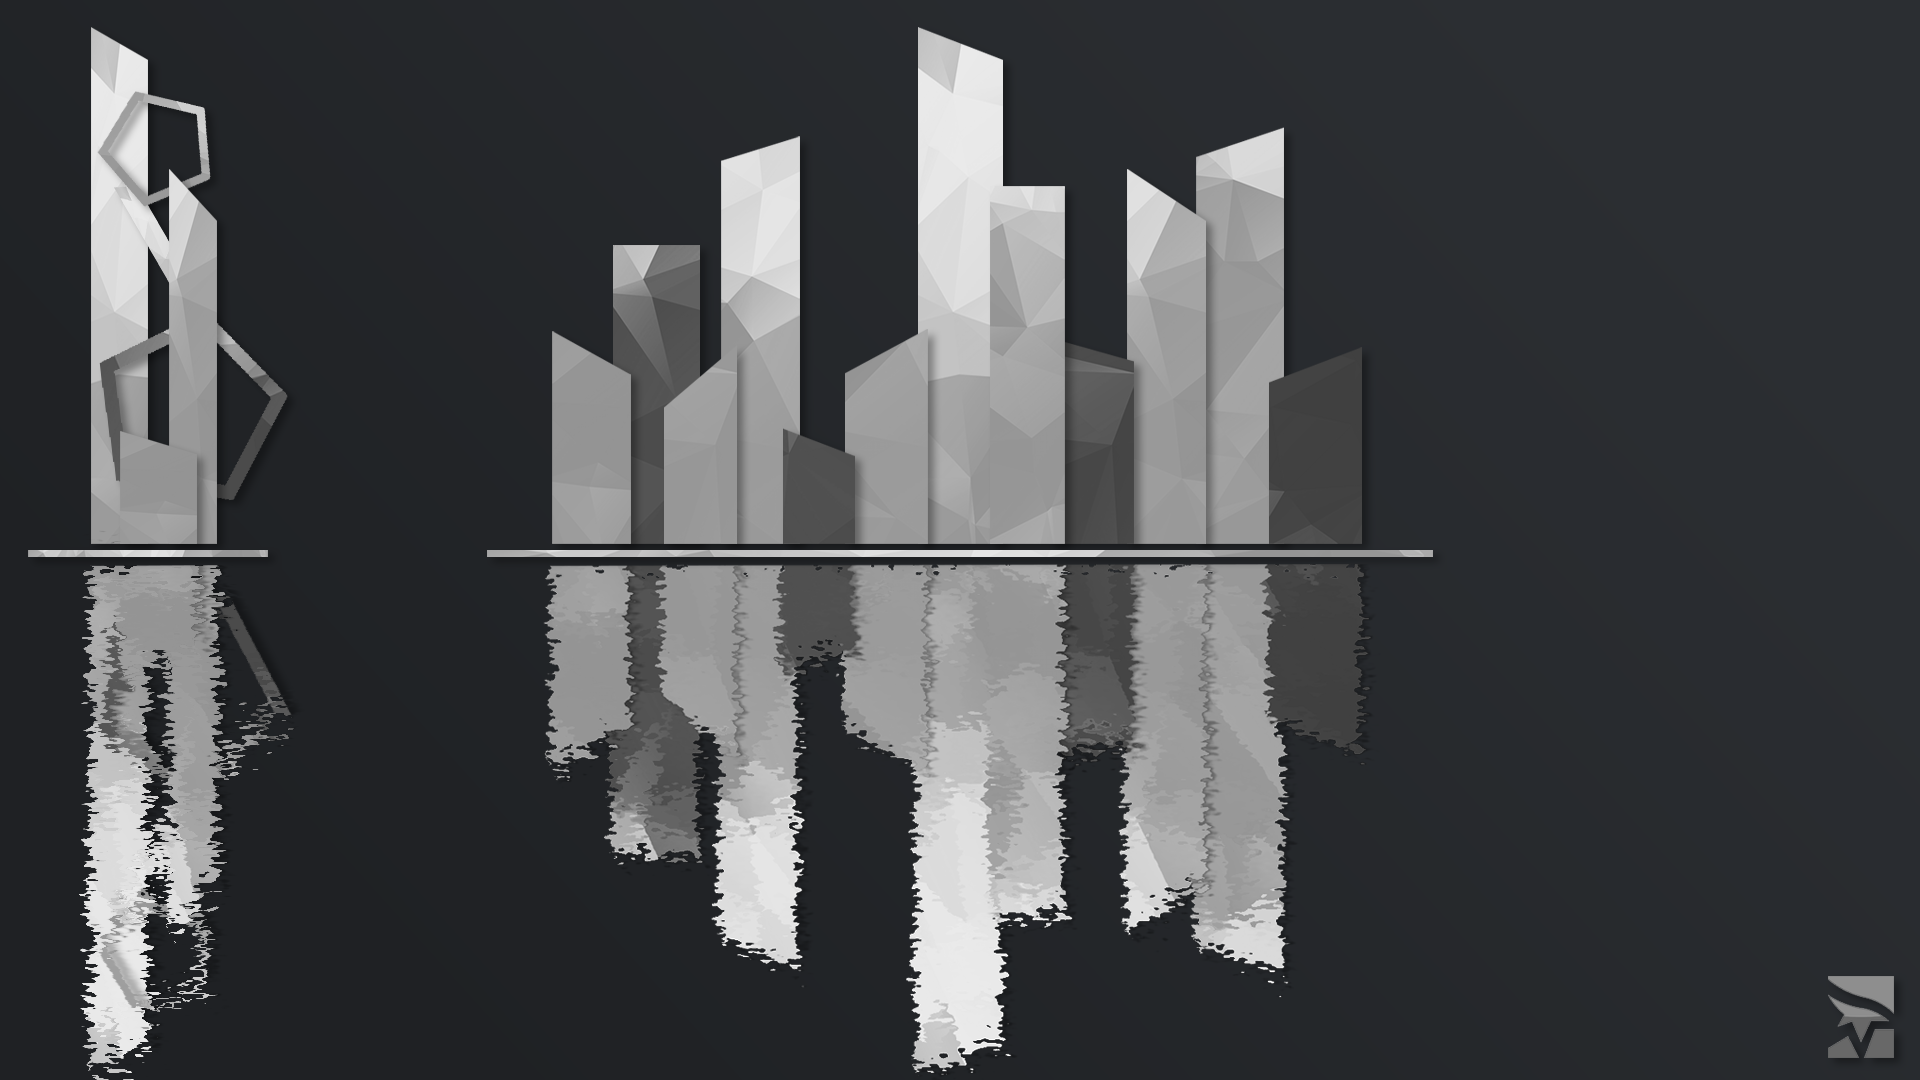 General 1920x1080 Mirror's Edge reflection geometry city abstract white black The Shard video games PC gaming gray